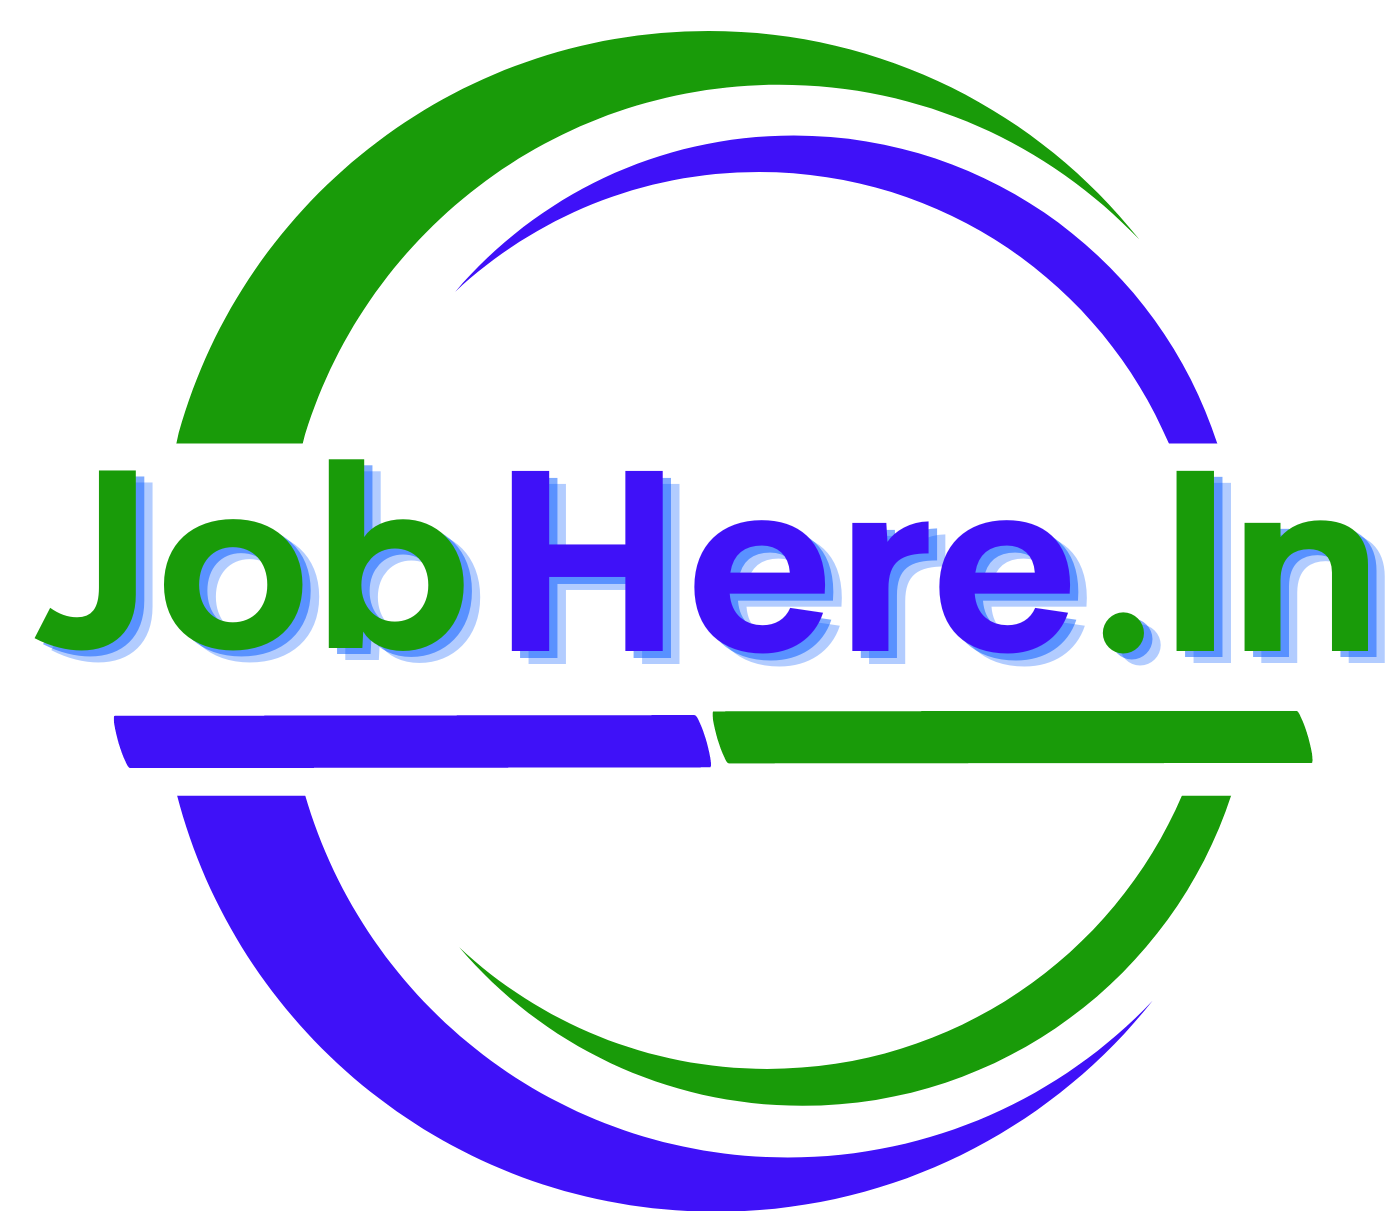 Jobhere.in